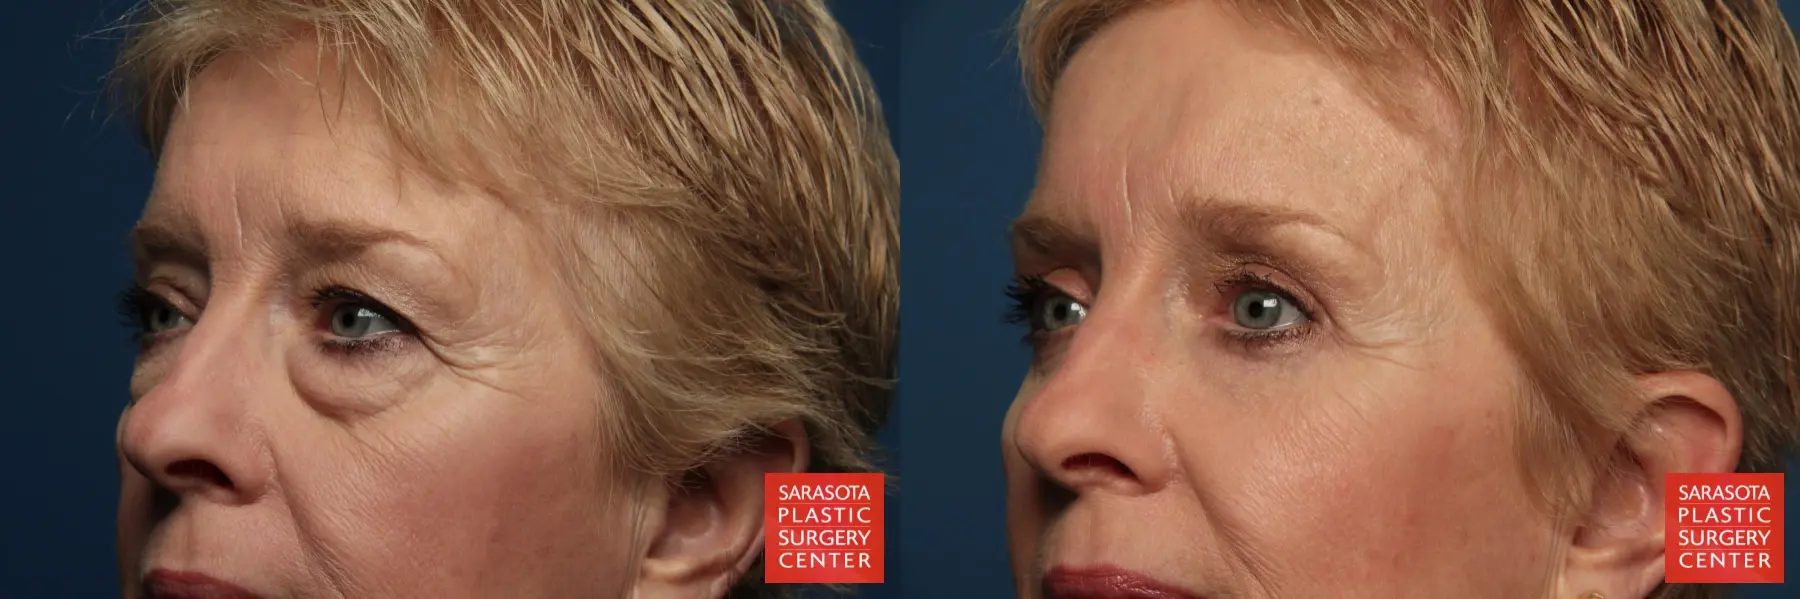 Eyelid Lift: Patient 1 - Before and After 2